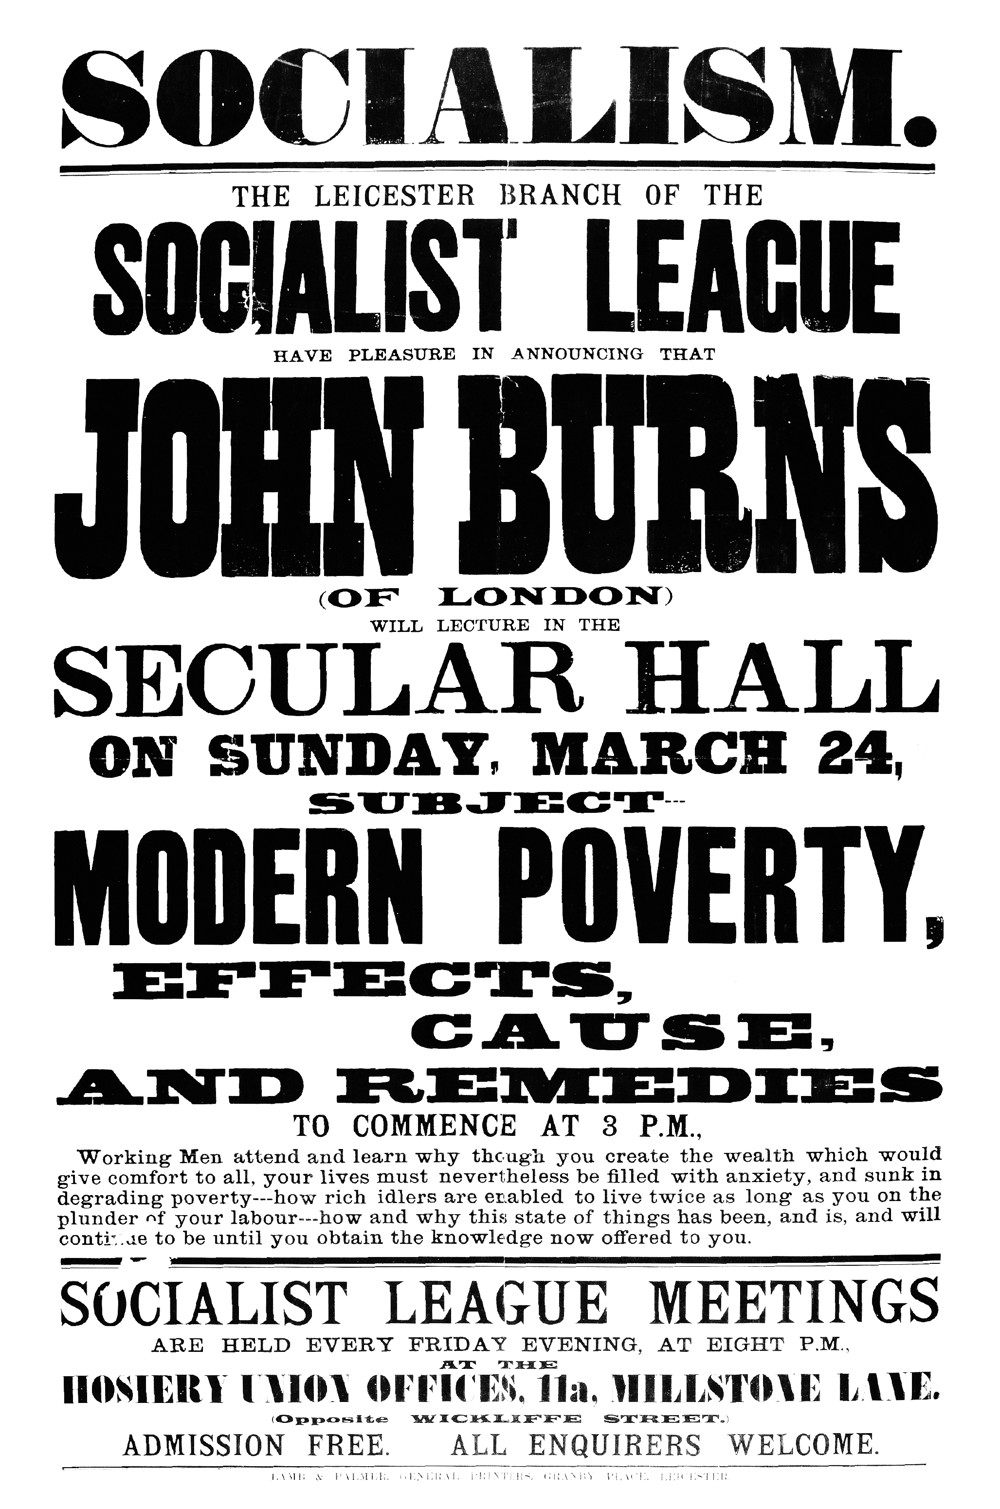 Poster for Leicester Socialist League event, 1889. Courtesy of Gorrie Collection, University of Leicester Special Collections Online, specialcollections.le.ac.uk